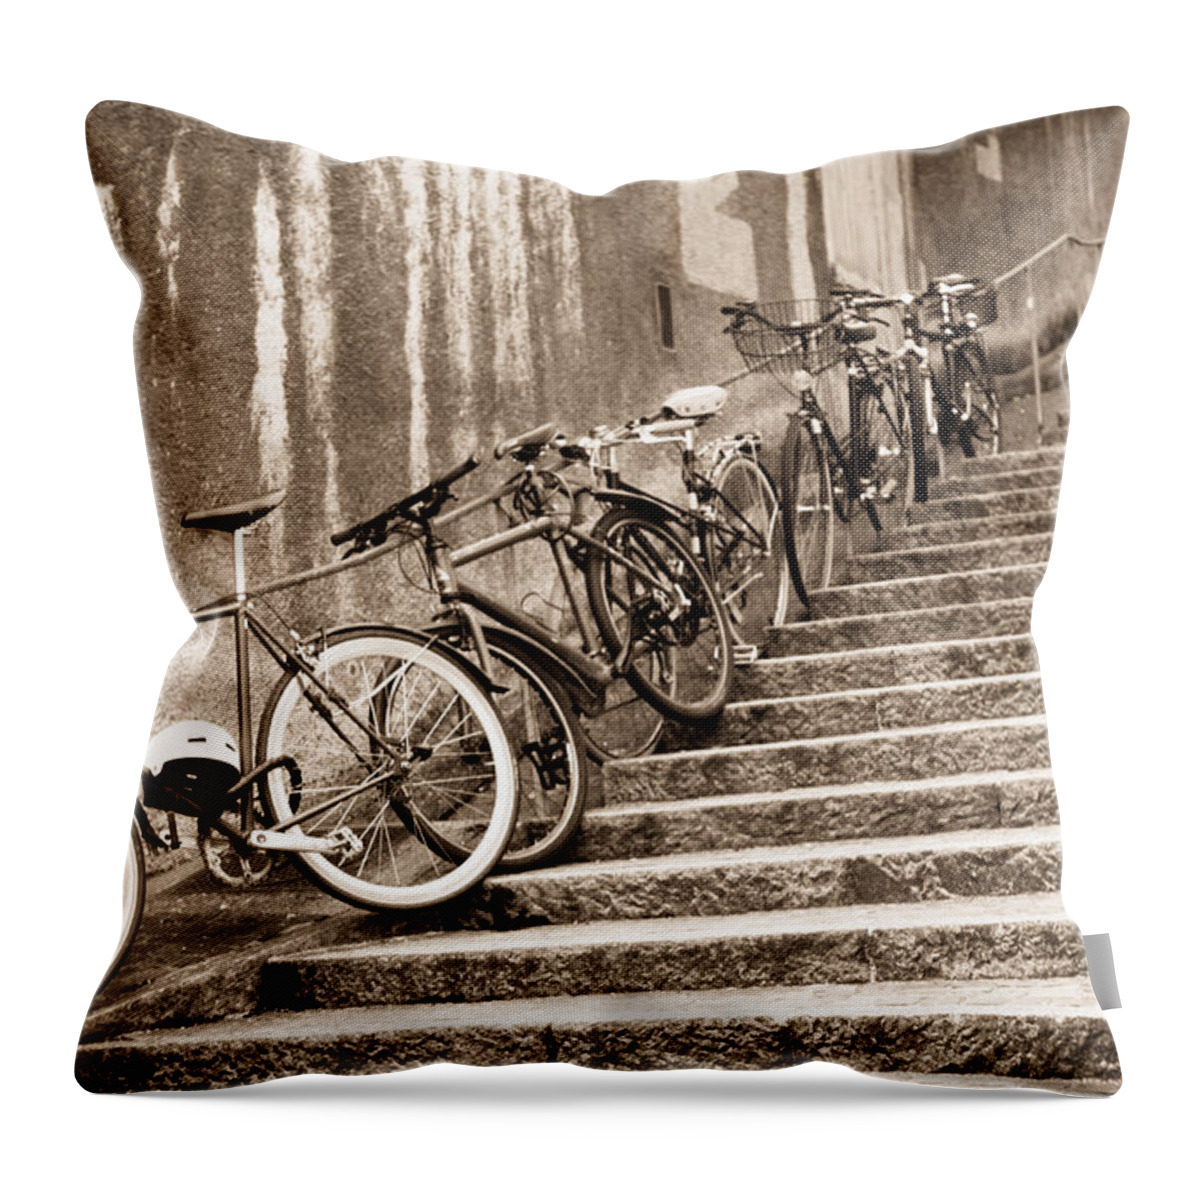 Bike Throw Pillow featuring the photograph Bike Stairs Zurich by Lauri Novak